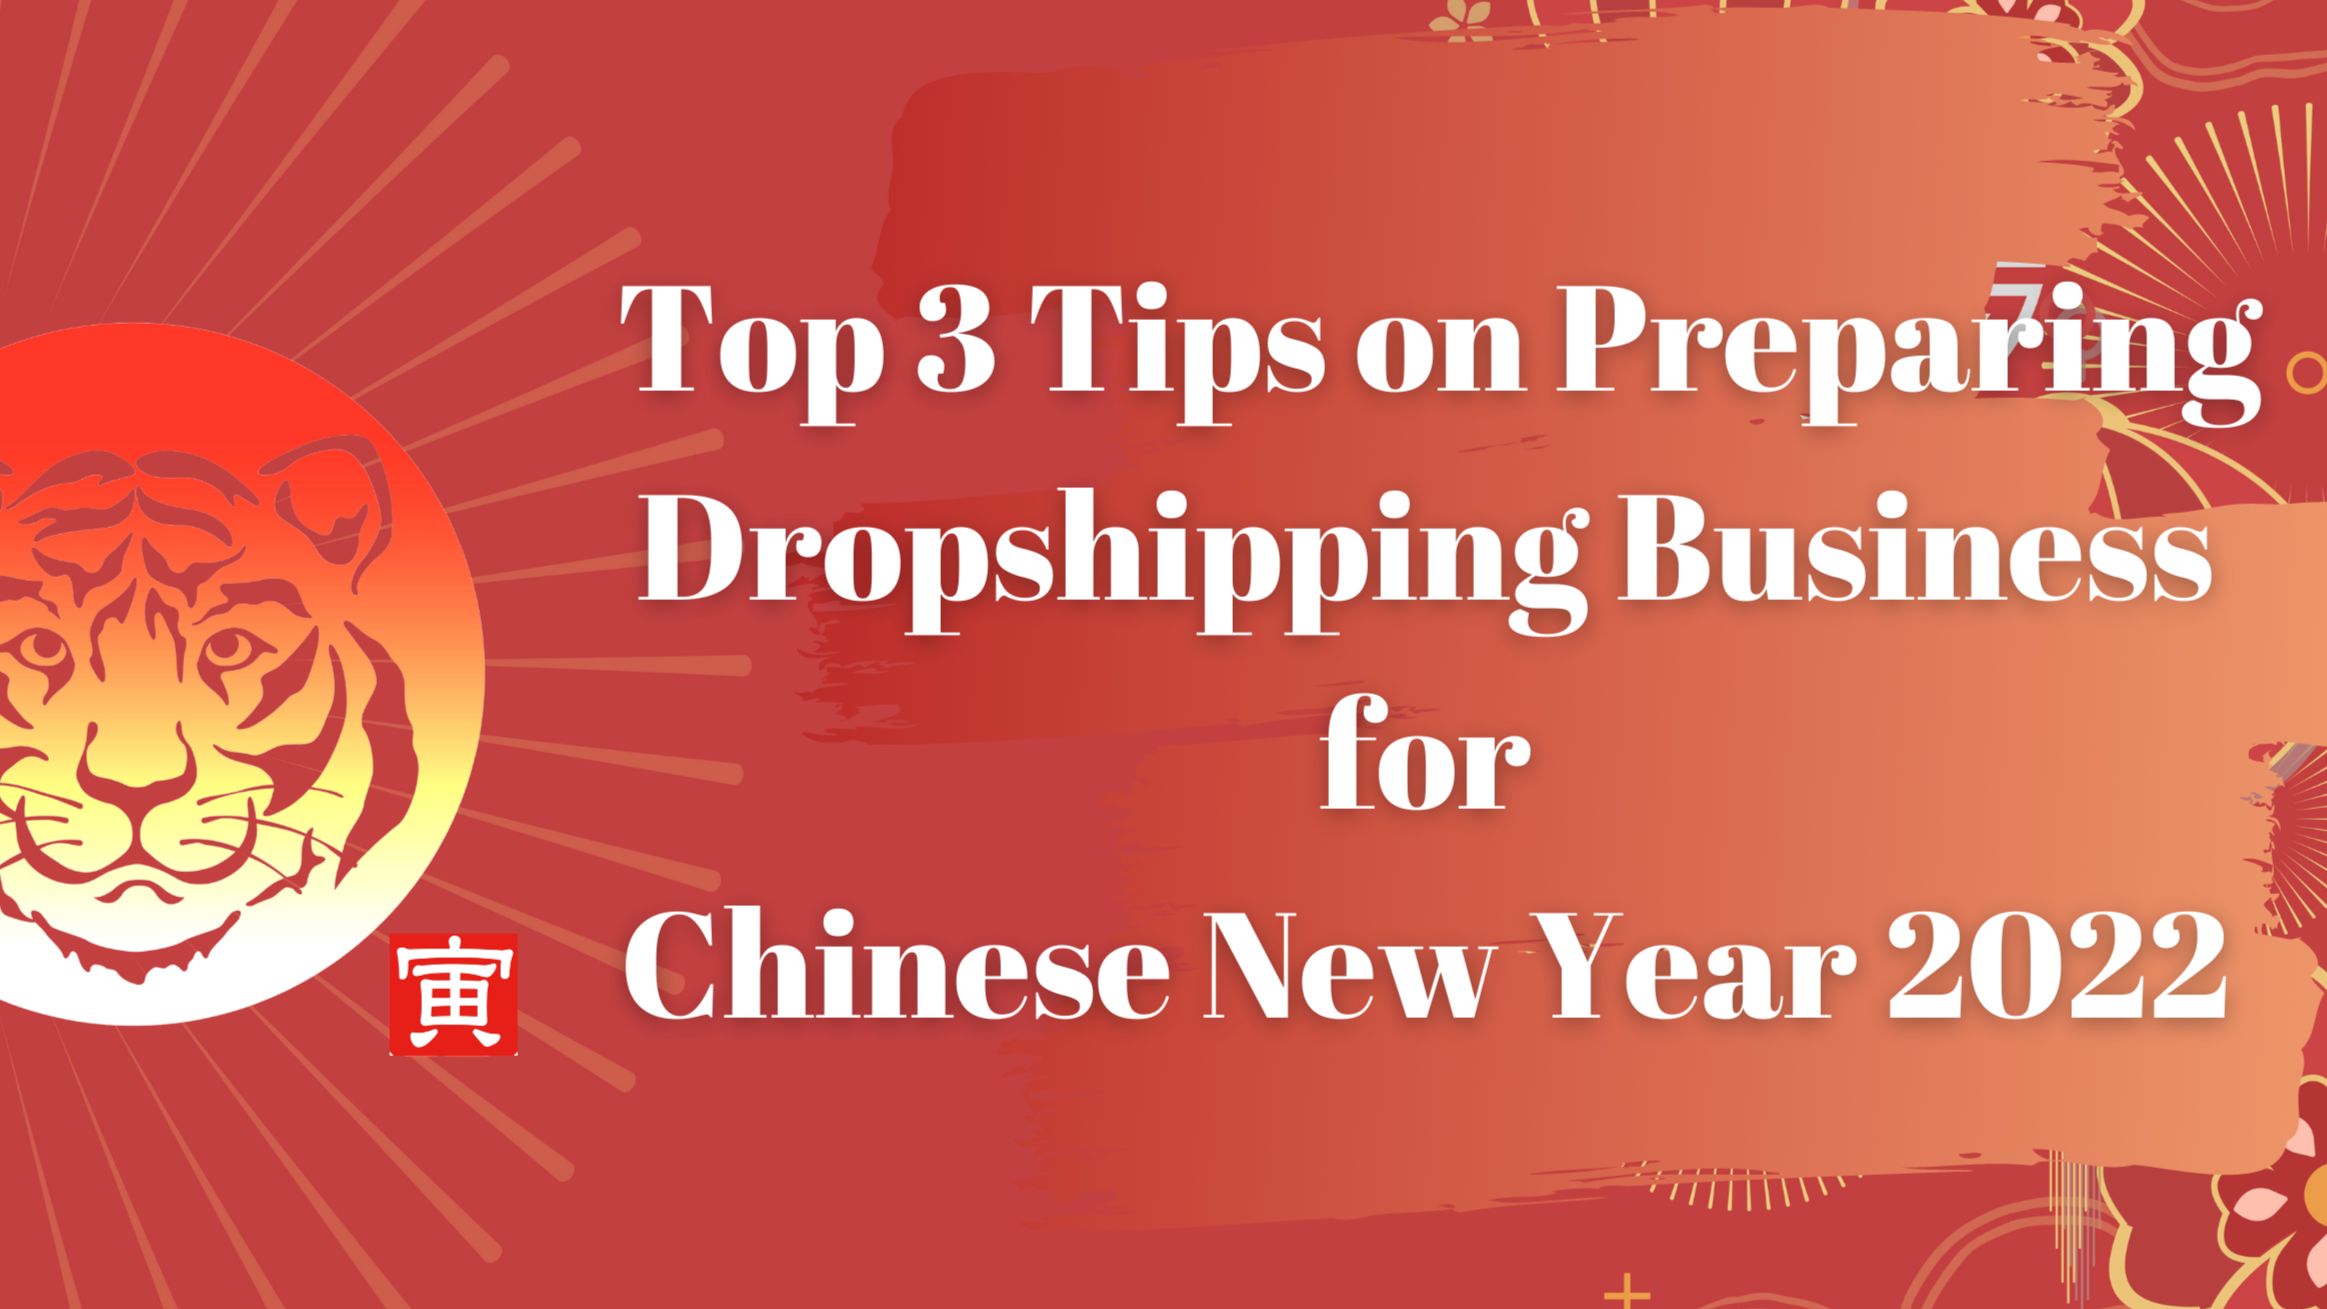 How to Start Dropshipping Business Online 2022: Step-by-Step Guide